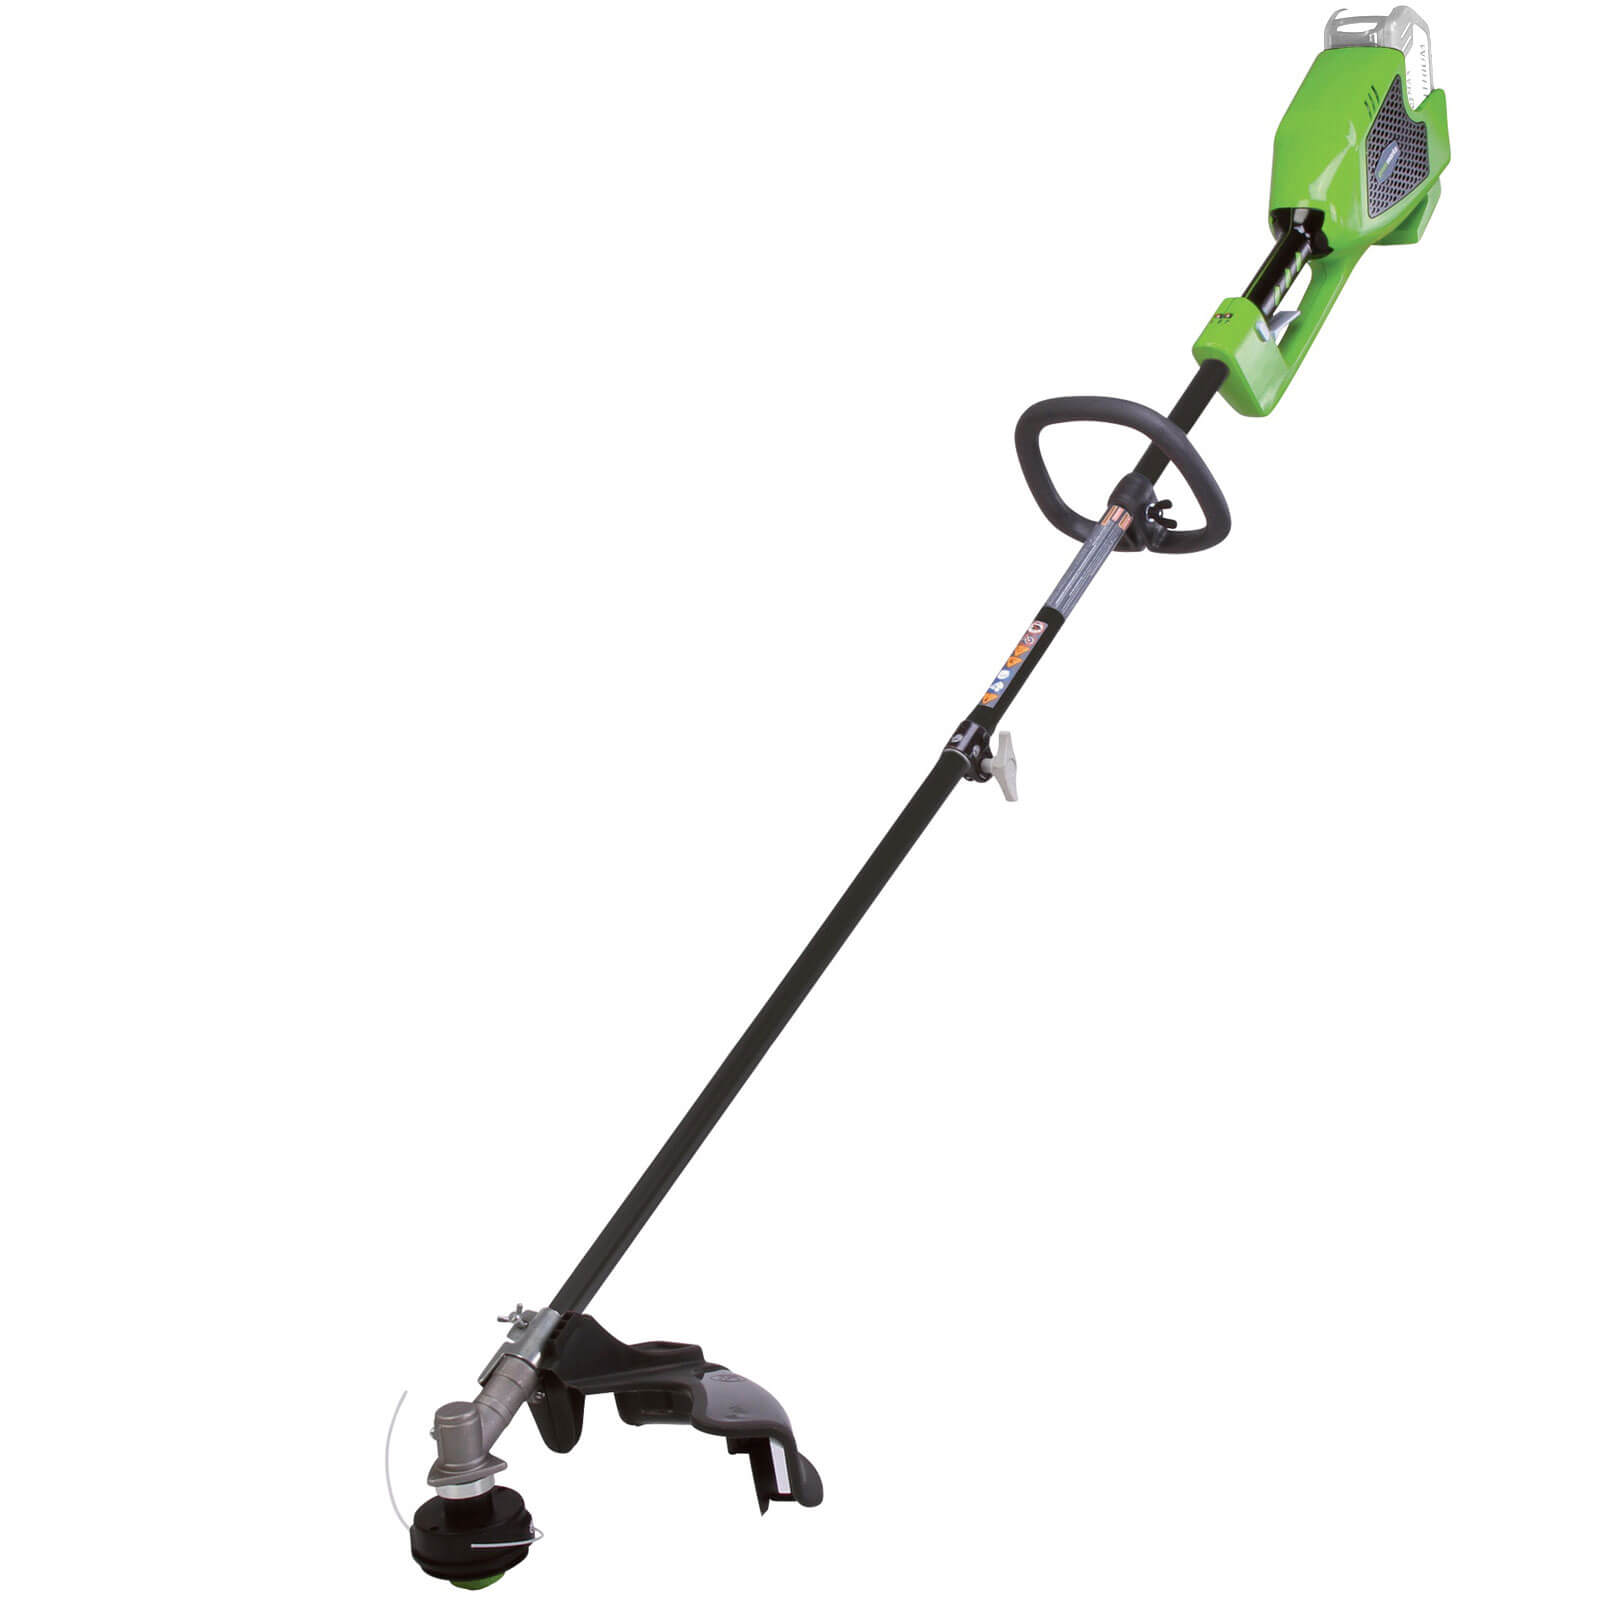 Image of Greenworks GD40BC 40v Cordless Brushless Grass Trimmer 350mm No Batteries No Charger